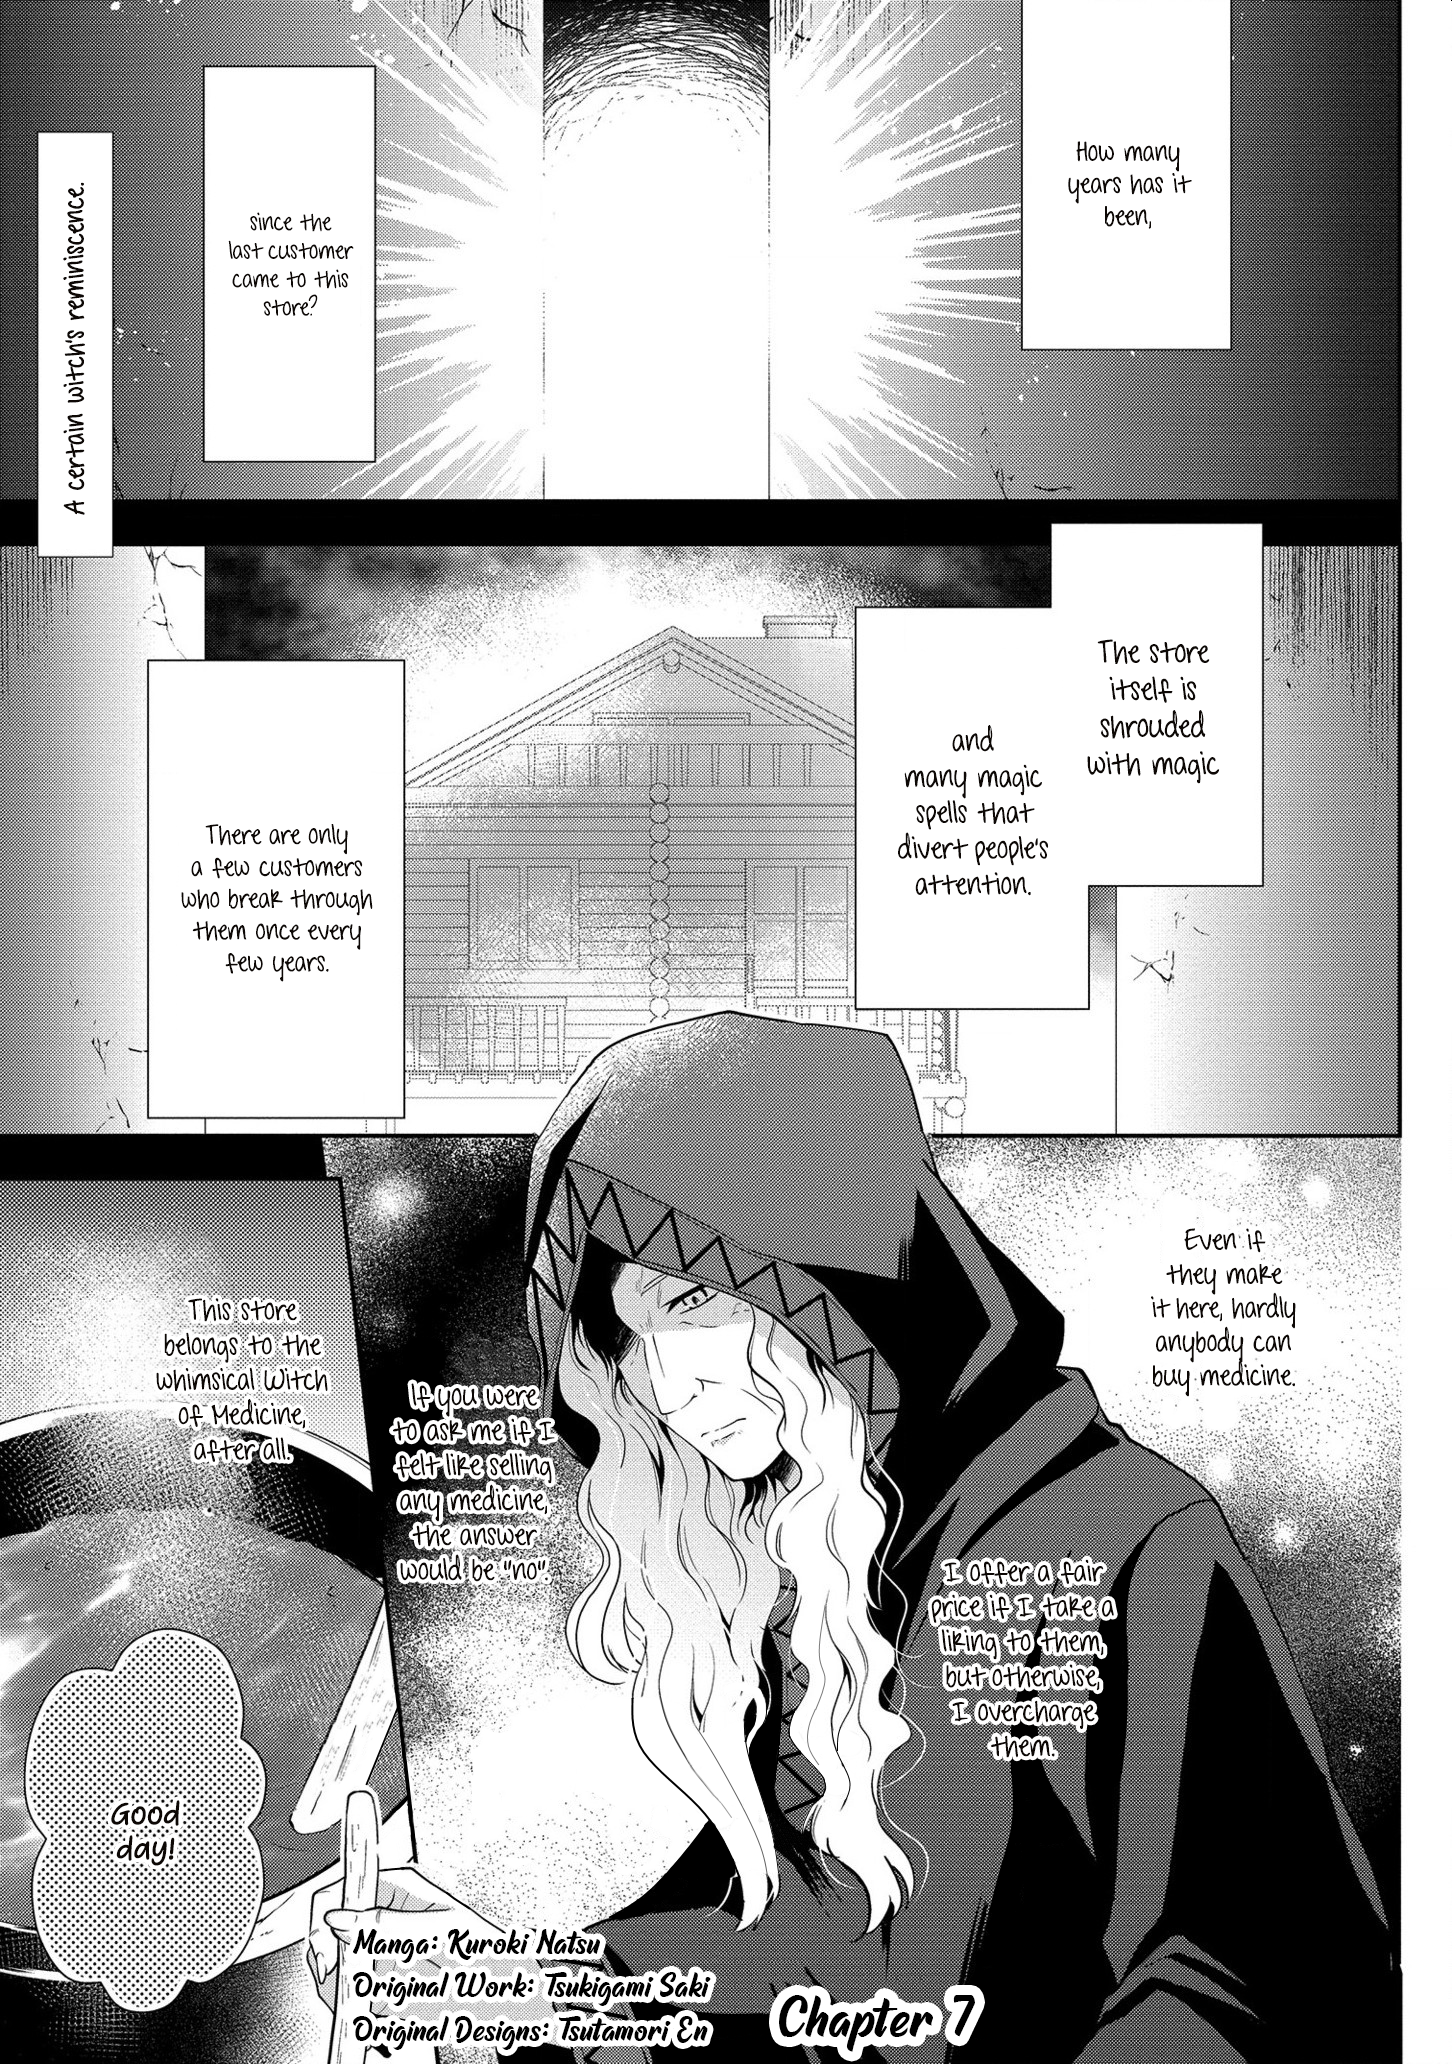 I Don't Want To Become Crown Princess!! - Page 1